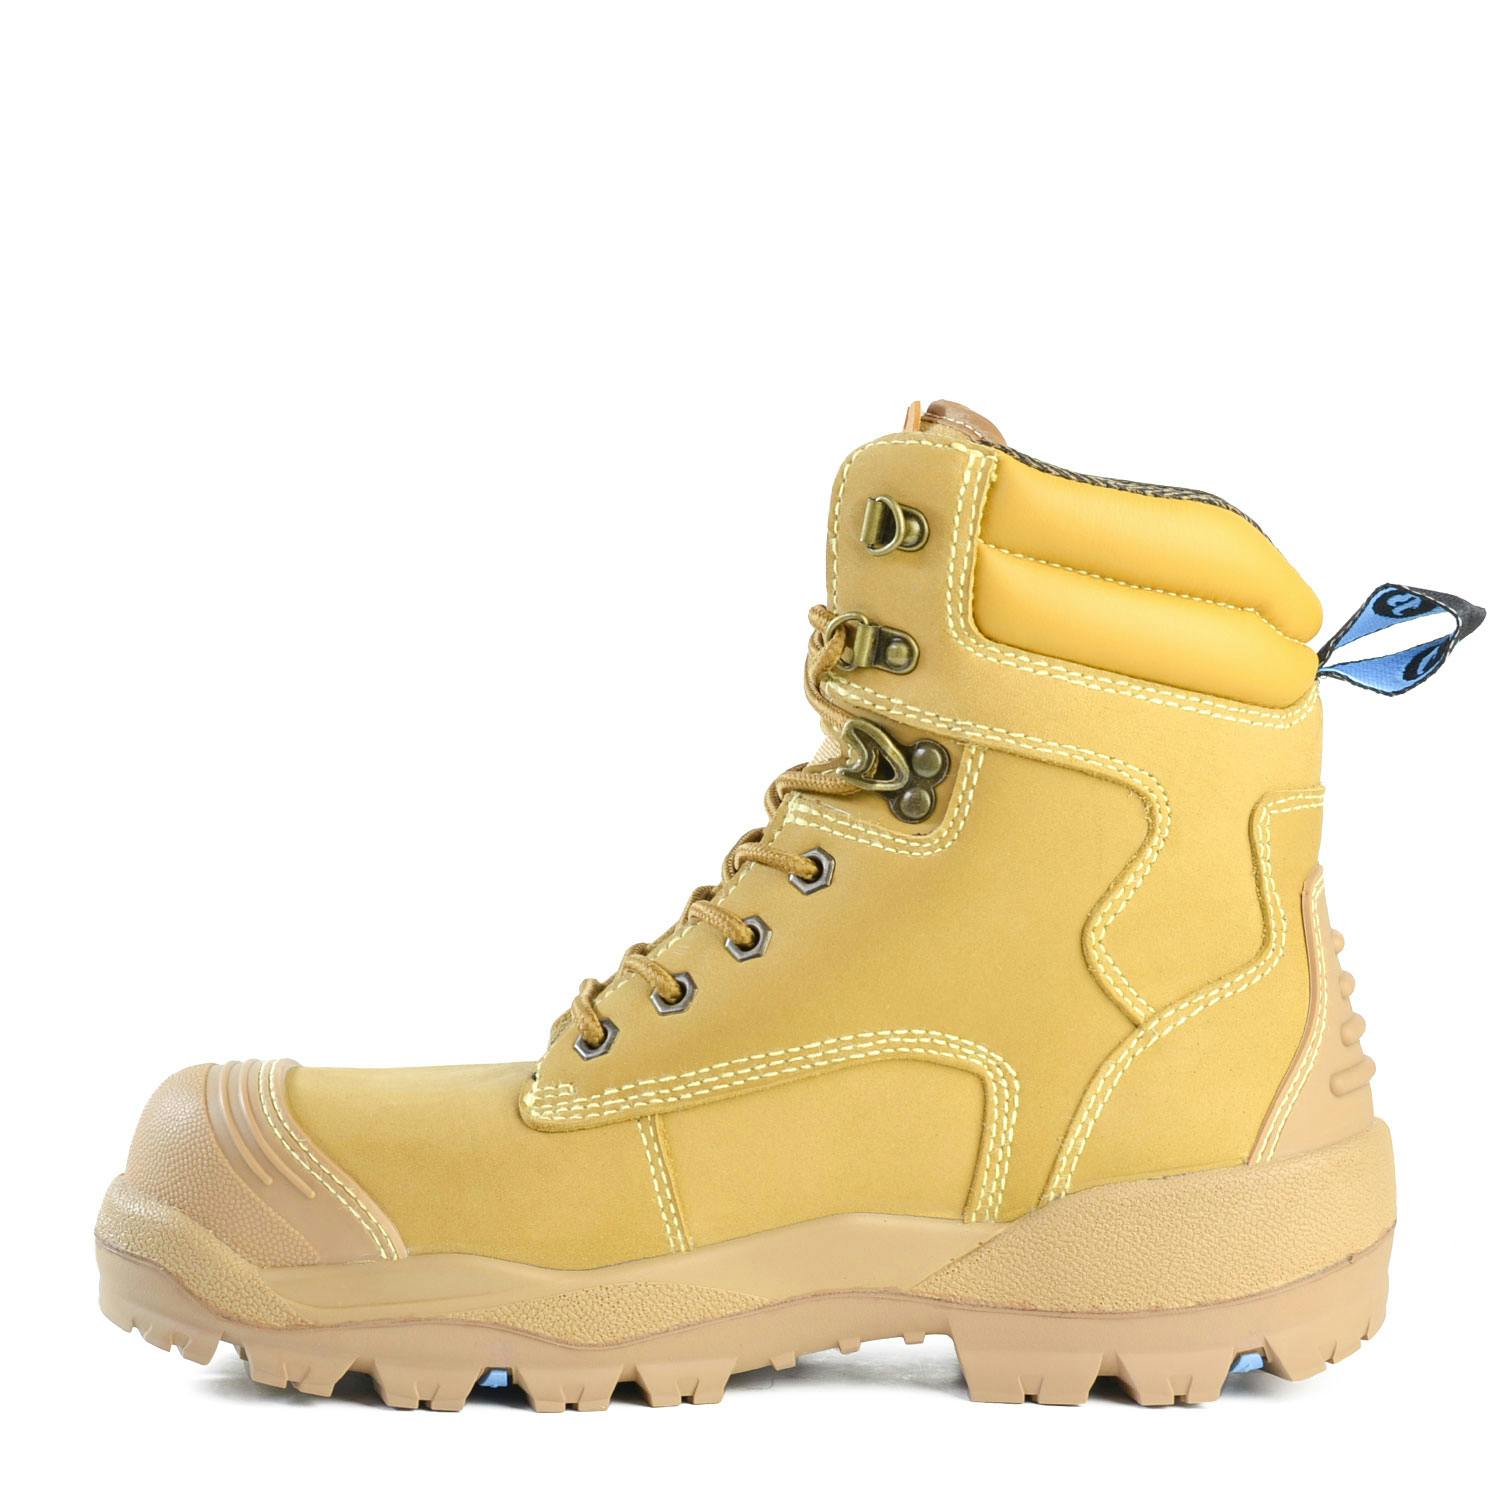 Bata Industrials Longreach-Lace Ultra - Wheat Sc Lace Safety Boot_2